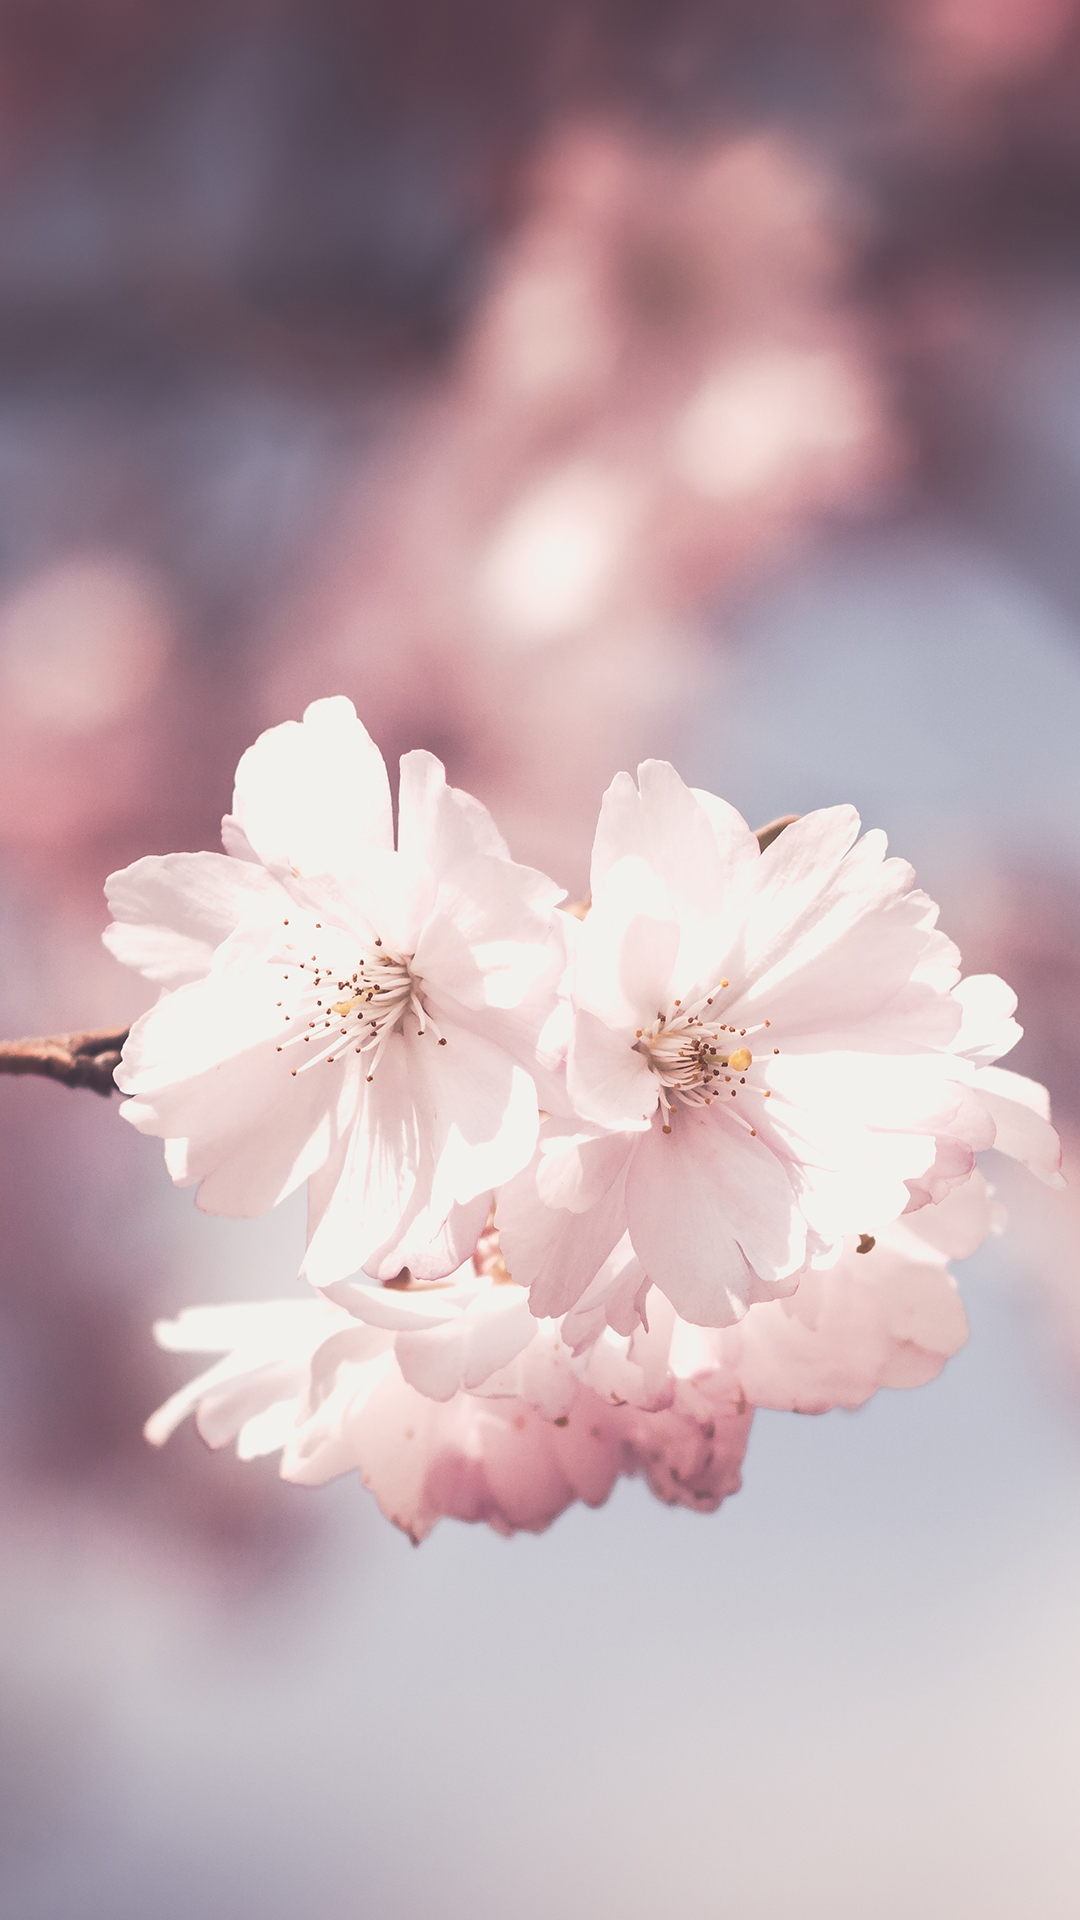 Pink Flower Blossoms Wallpaper For Phone